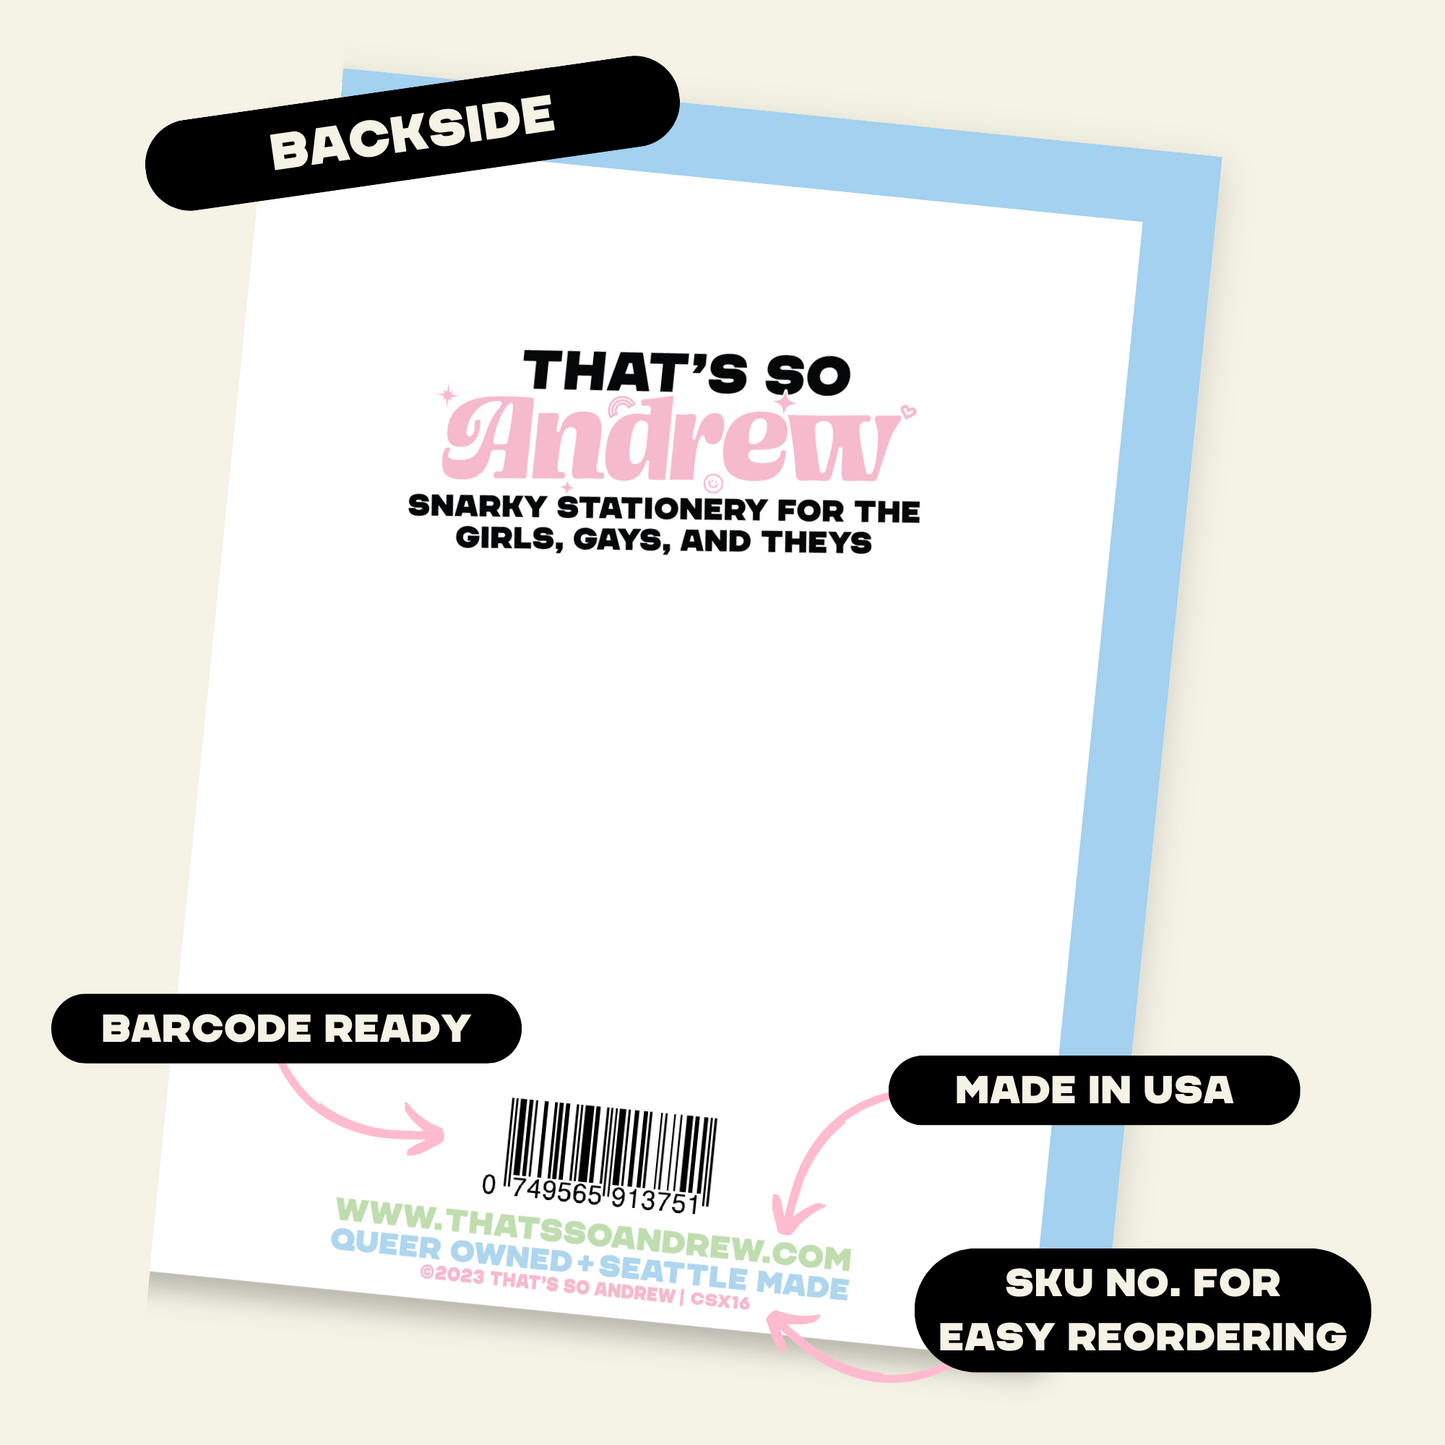 Love Your Average Dick | Funny and Dirty Adult Greeting Card